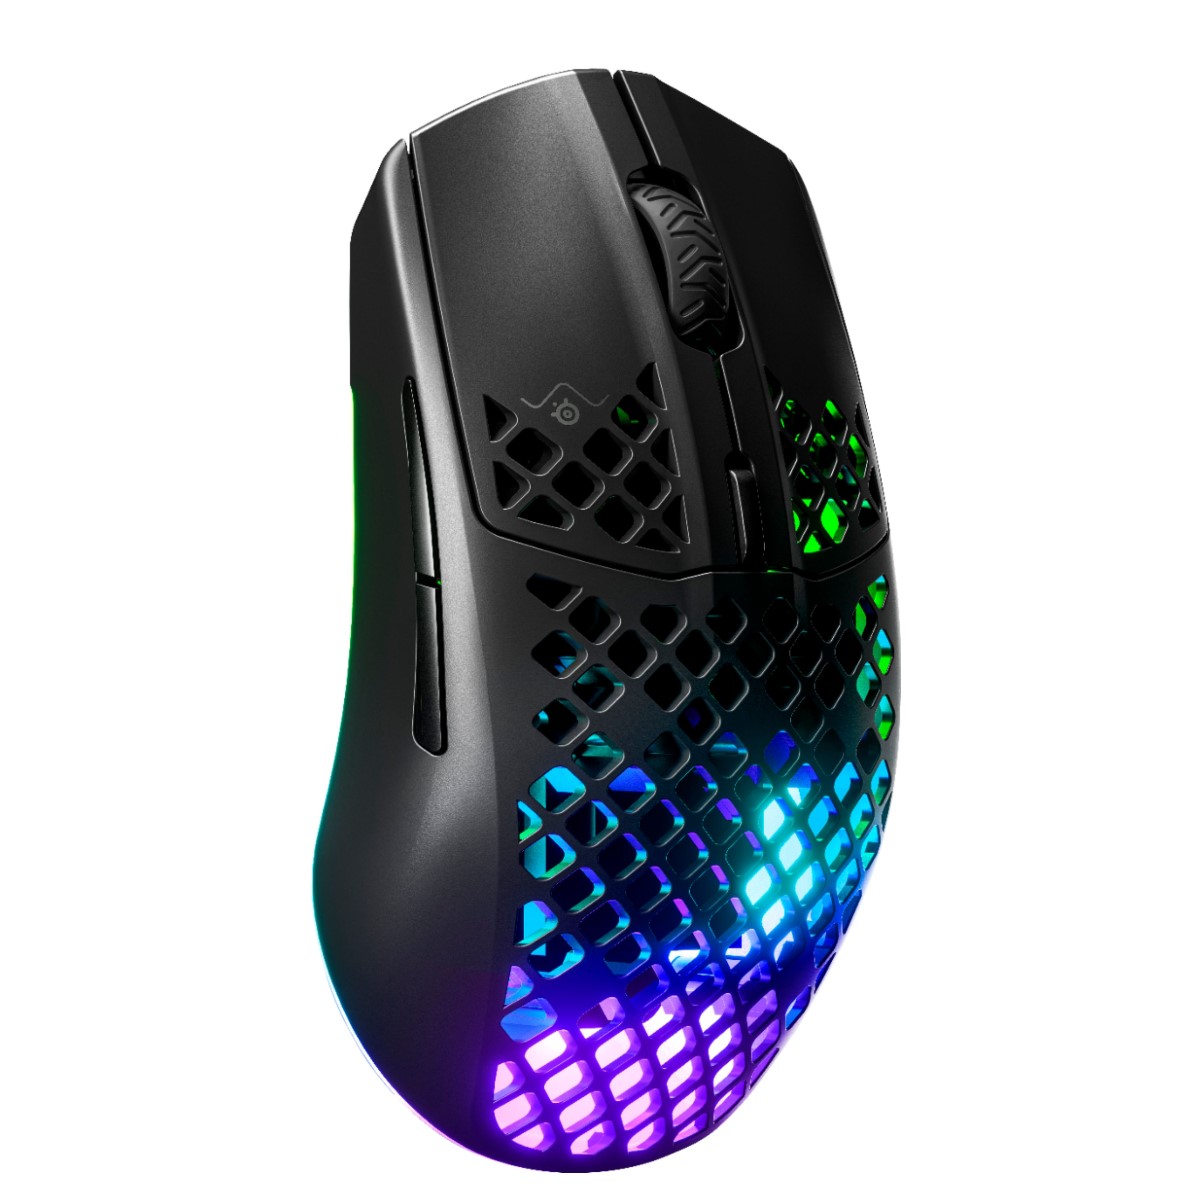 y - Steelseries Clones Aerox 3 Mouse Gamer Wireless Periféricos